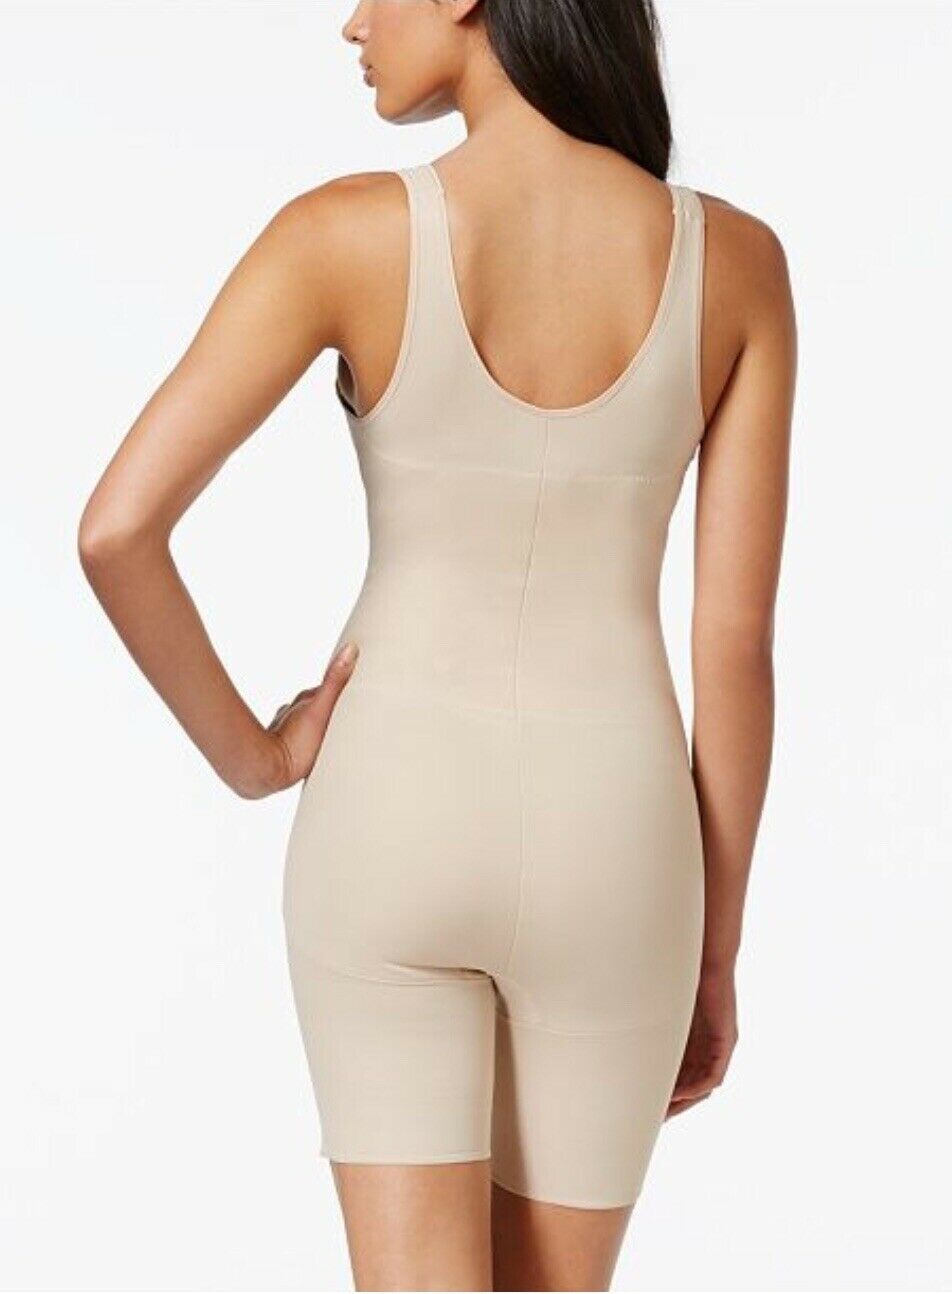 Miraclesuit Shape Away Torsette Thigh Slimmer - 2912